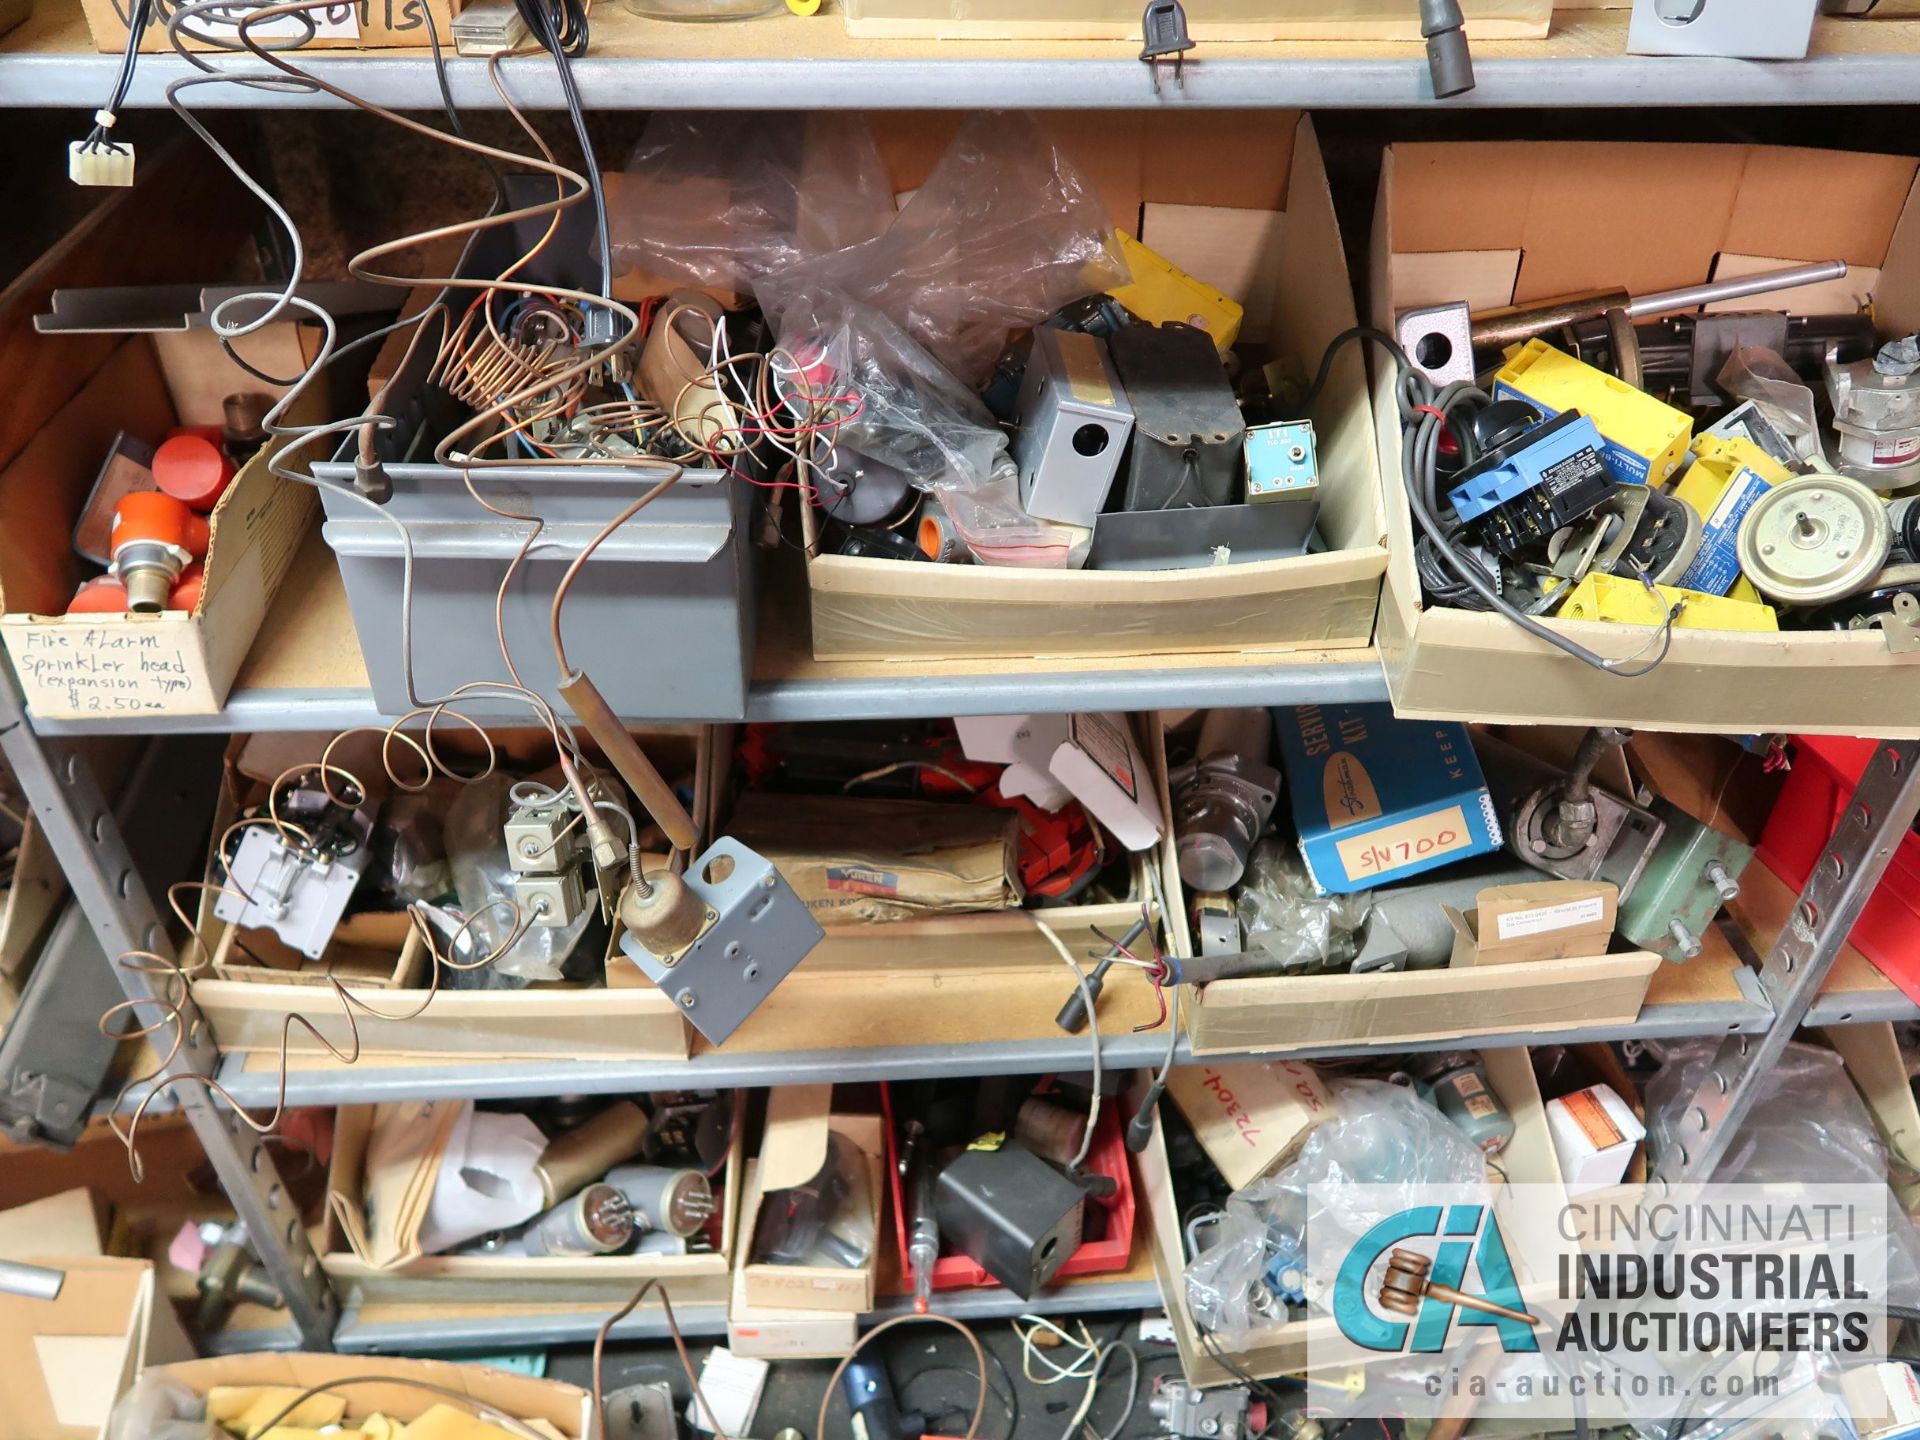 CONTENTS OF (16) SHELVES INCLUDING MISCELLANEOUS VALVES, THERMOSTATS, ANALYZERS, ELECTRICAL, CONTROL - Image 18 of 47